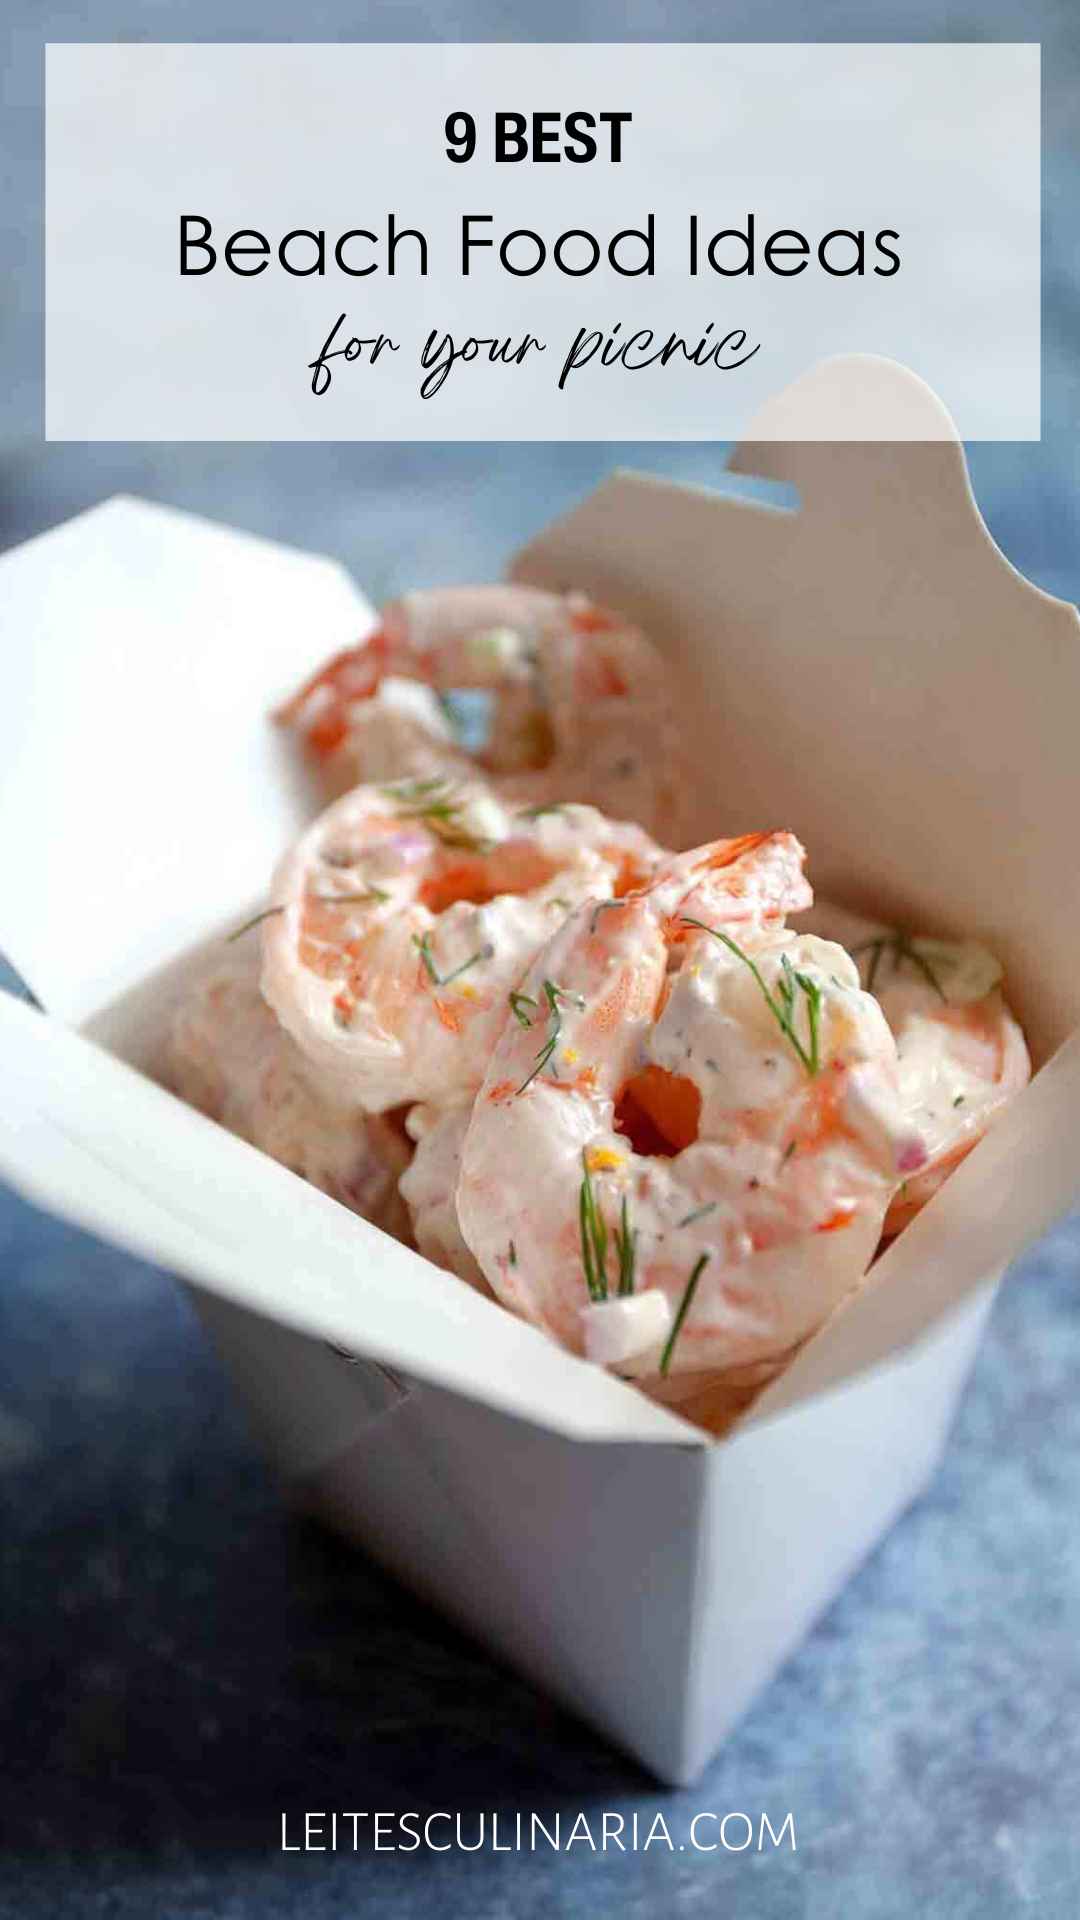 A white takeout container filled with shrimp salad.